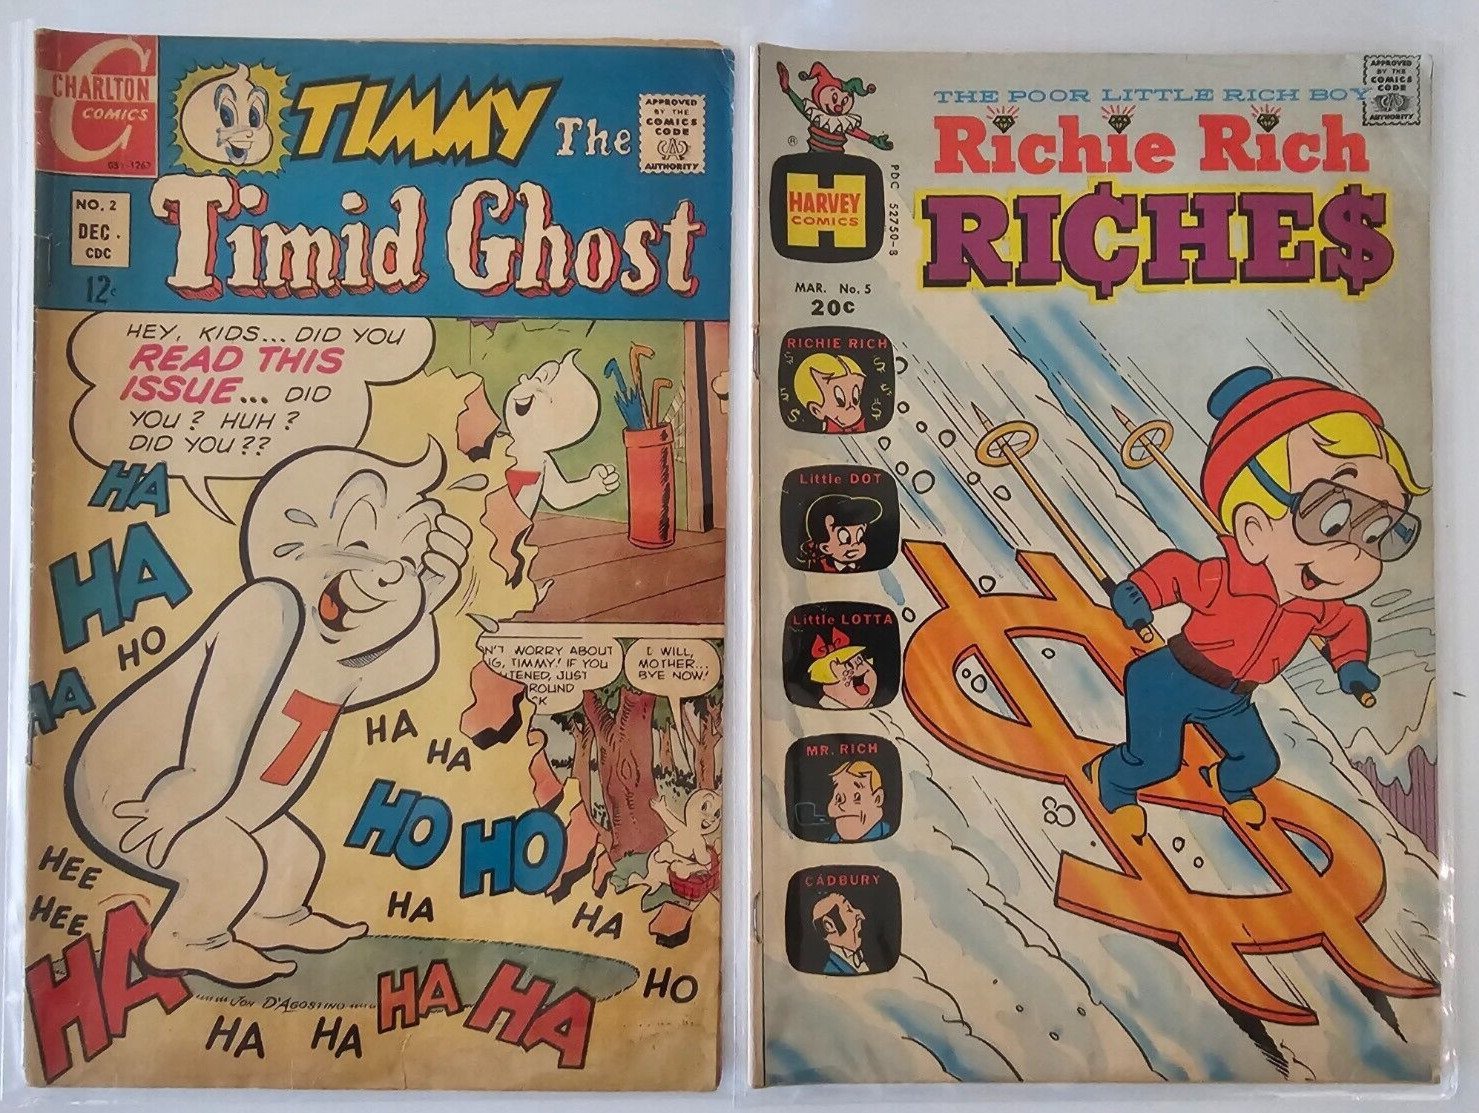 Timmy the Timid Ghost #2-12C(1967) Charlton and Richie Rich #5-20C(1973) Harvey